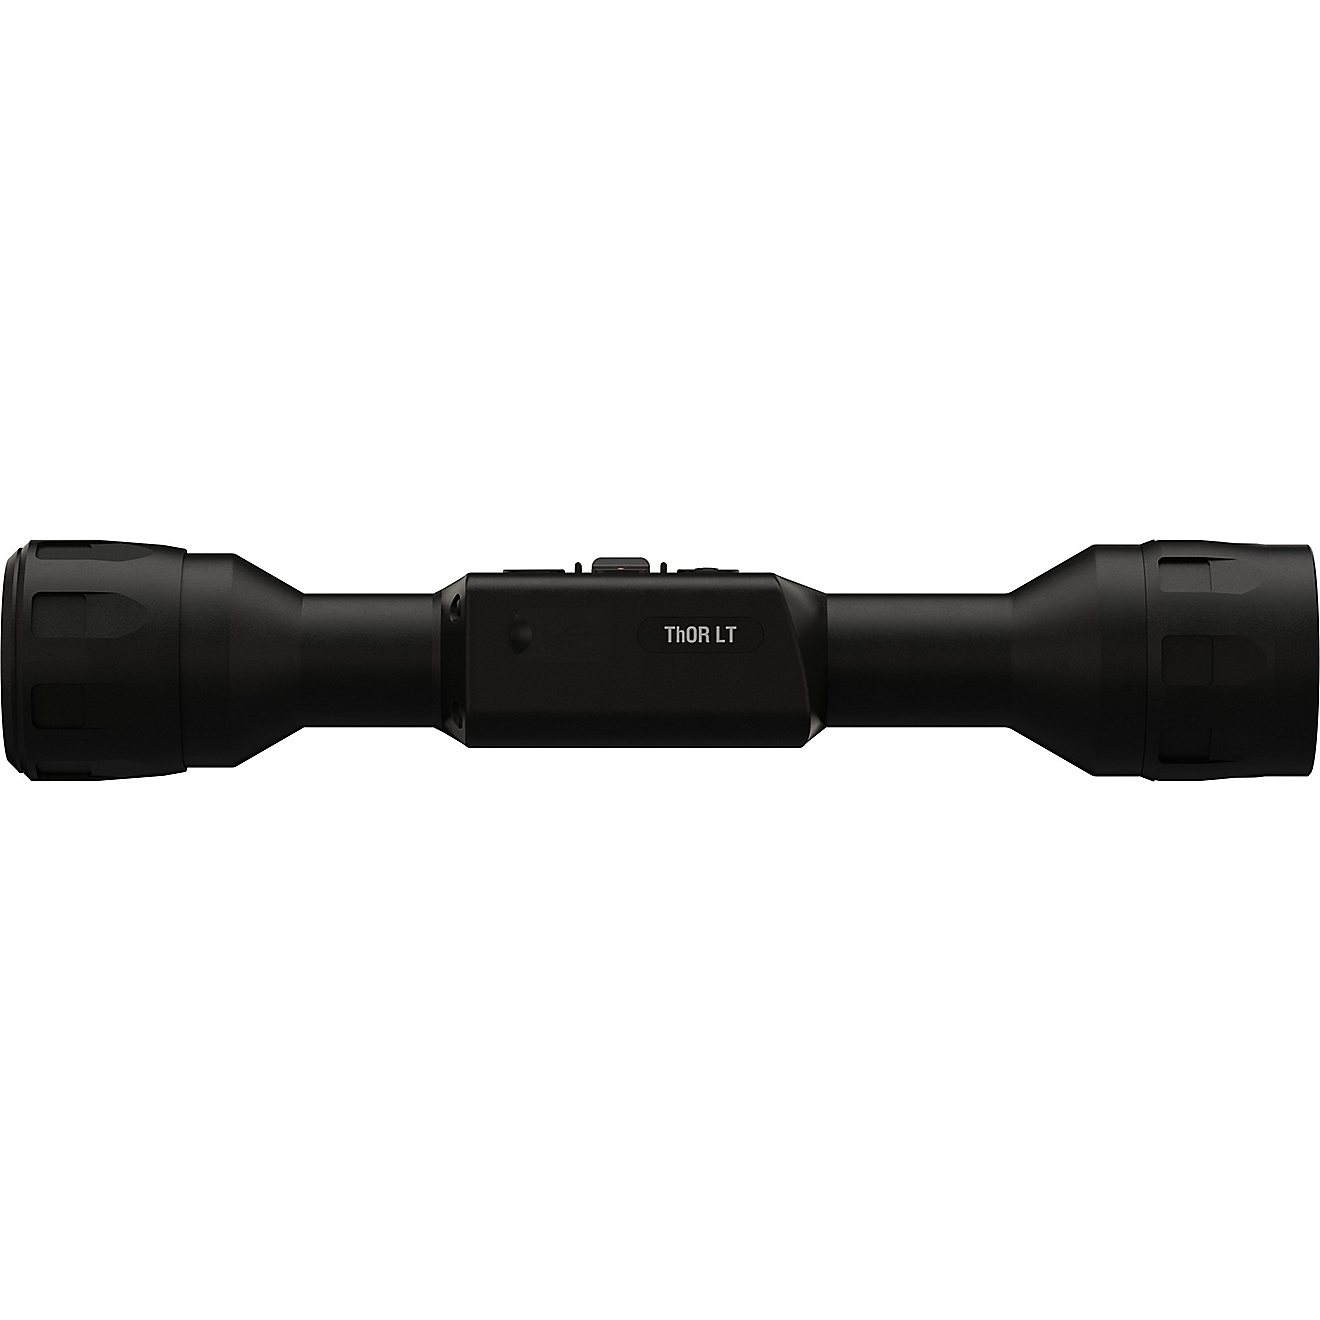 ATN Thor LT Thermal Riflescope                                                                                                   - view number 6